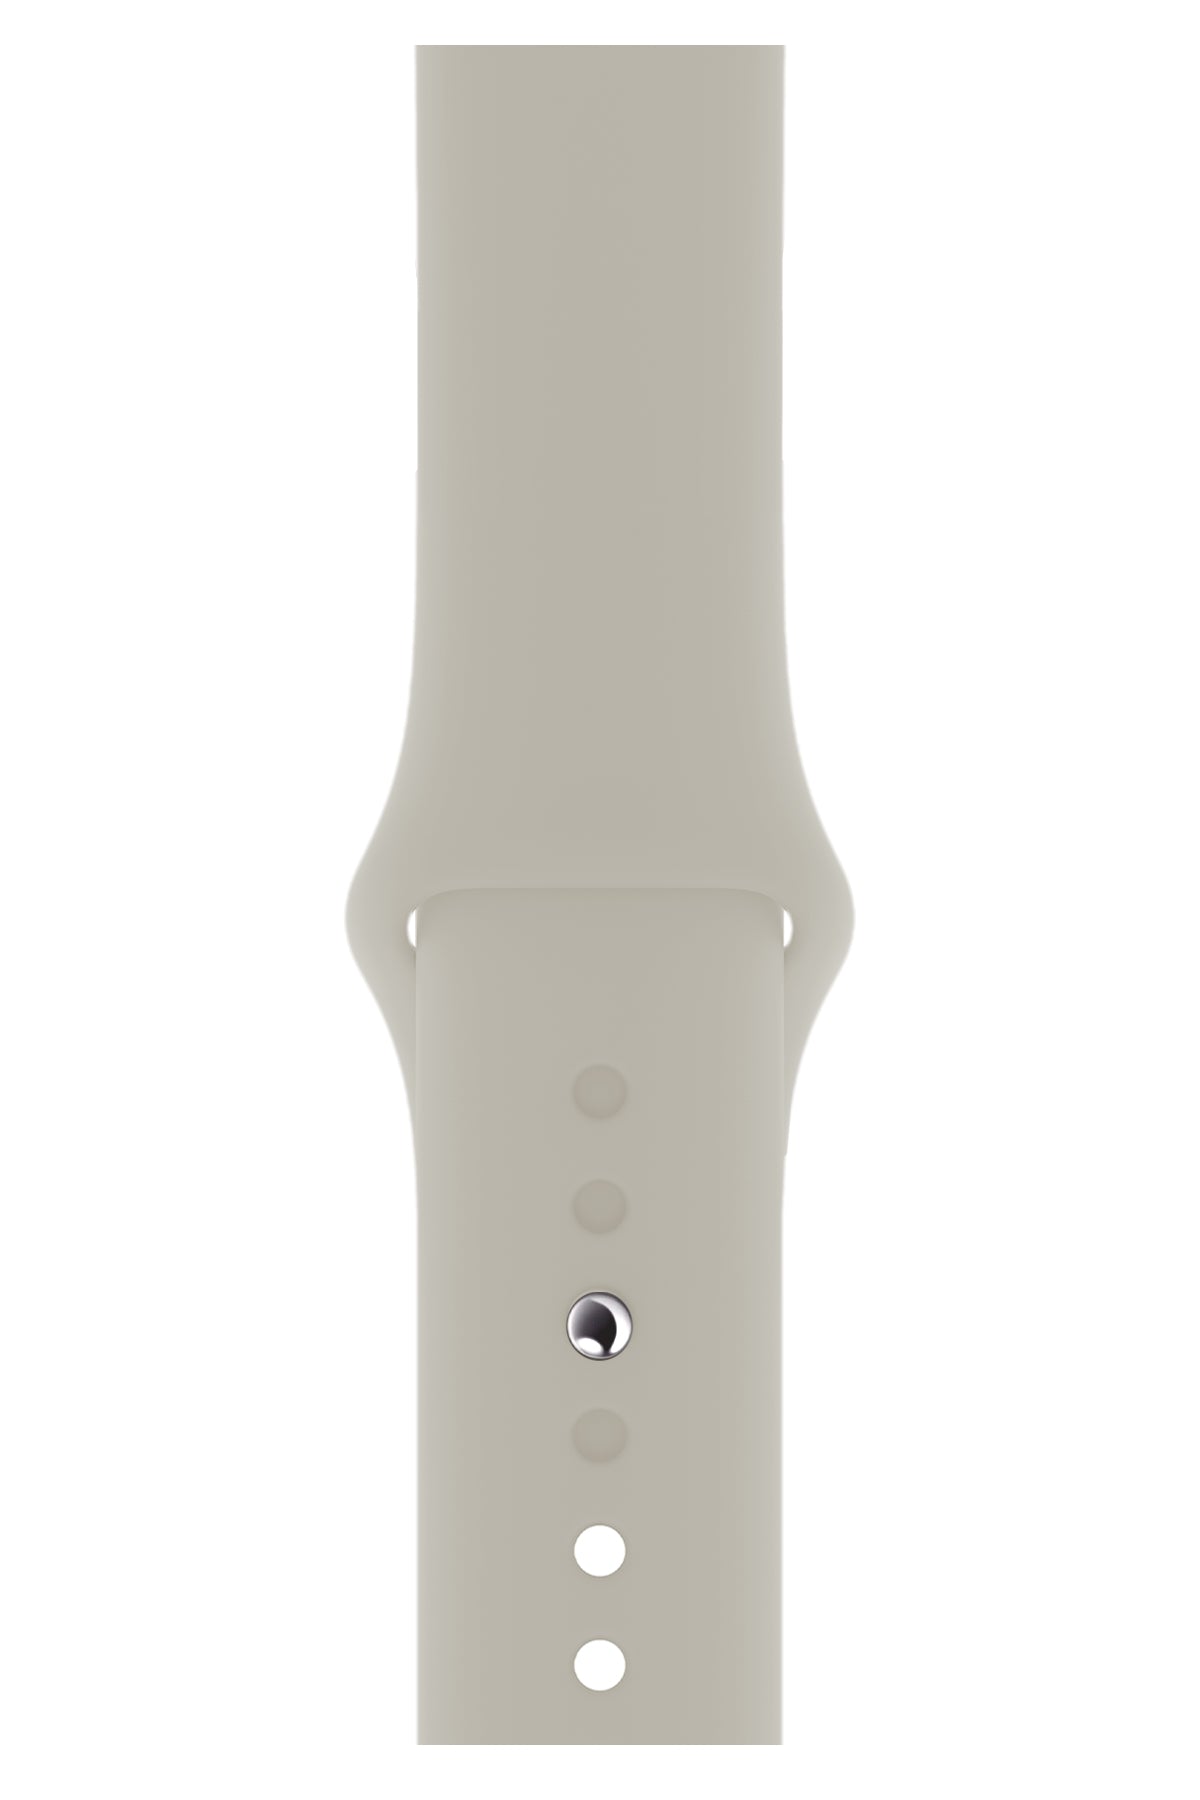 Apple Watch Compatible Silicone Sport Band Beige White 